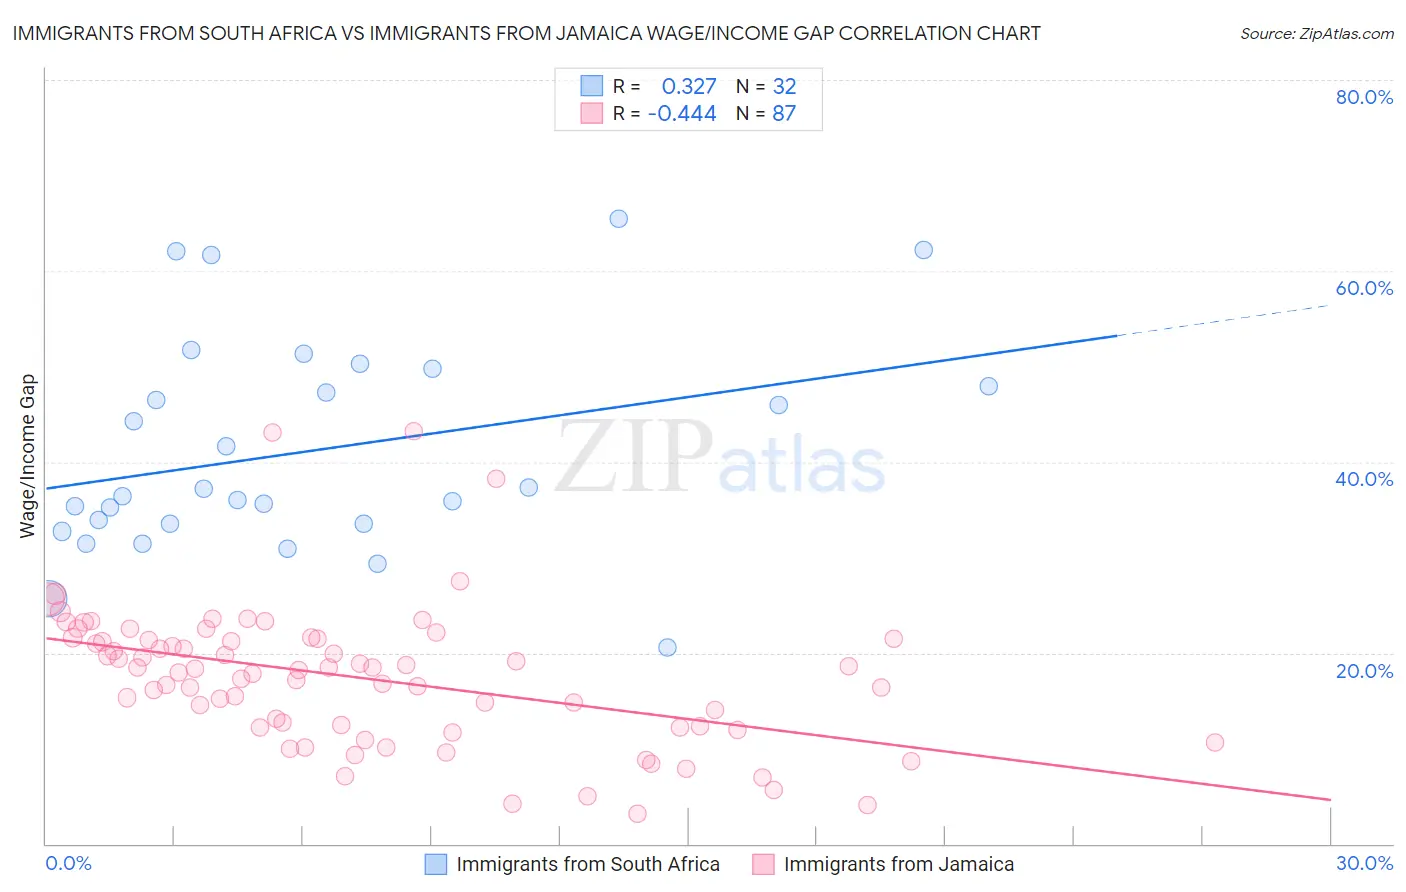 Immigrants from South Africa vs Immigrants from Jamaica Wage/Income Gap